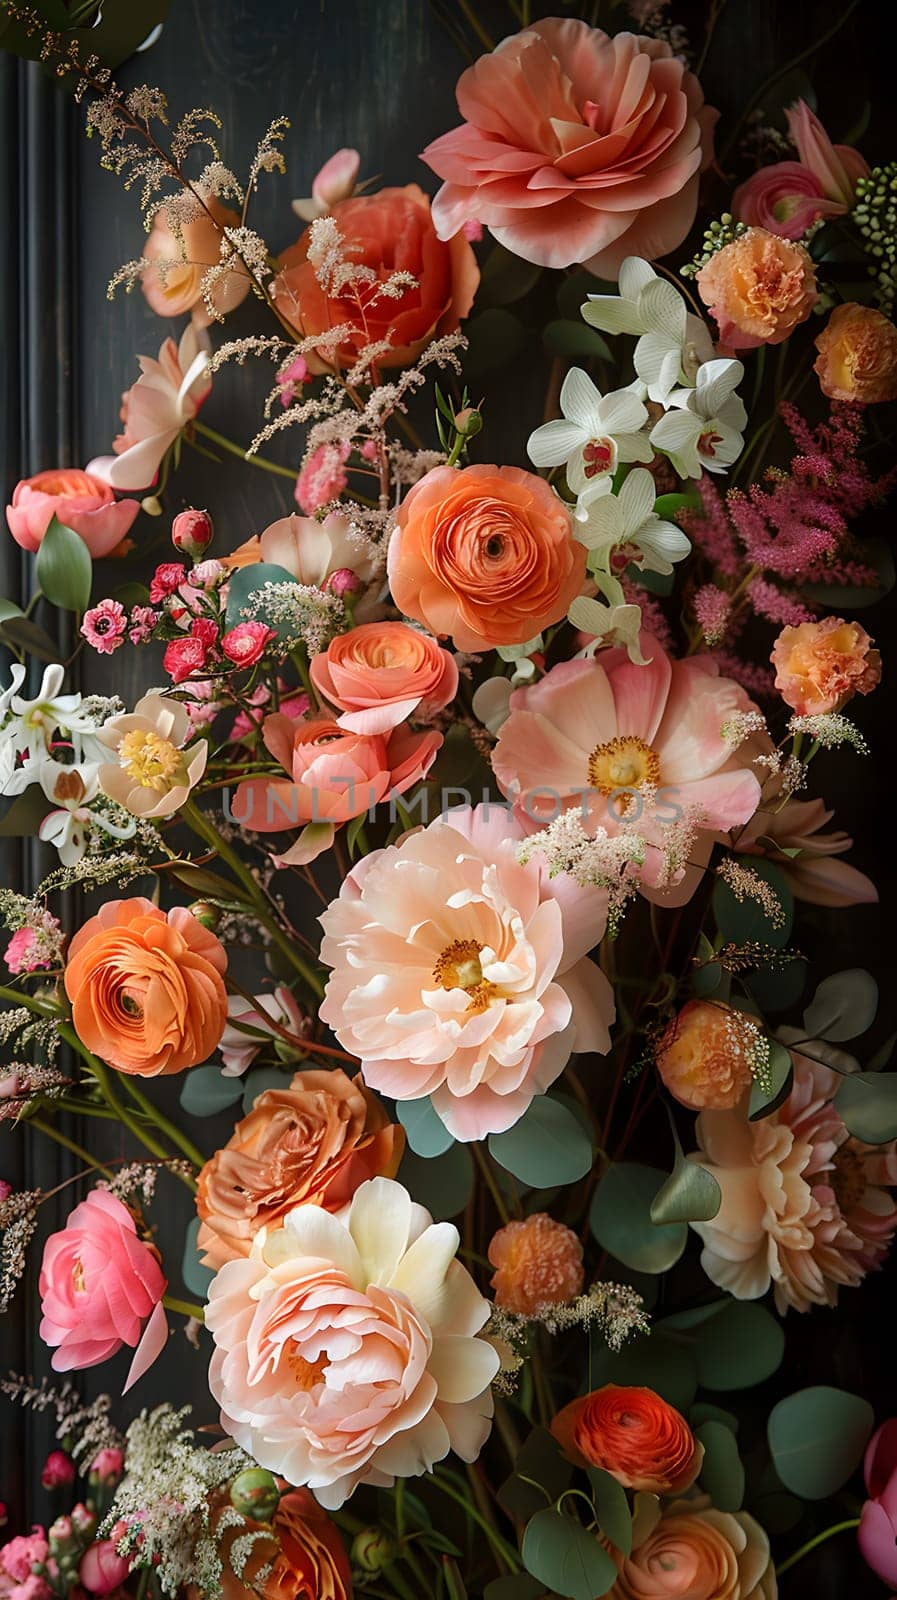 The picture showcases a variety of flowers including hybrid tea roses, garden roses, and pink bouquets. It is a beautiful display of creative arts and flower arranging